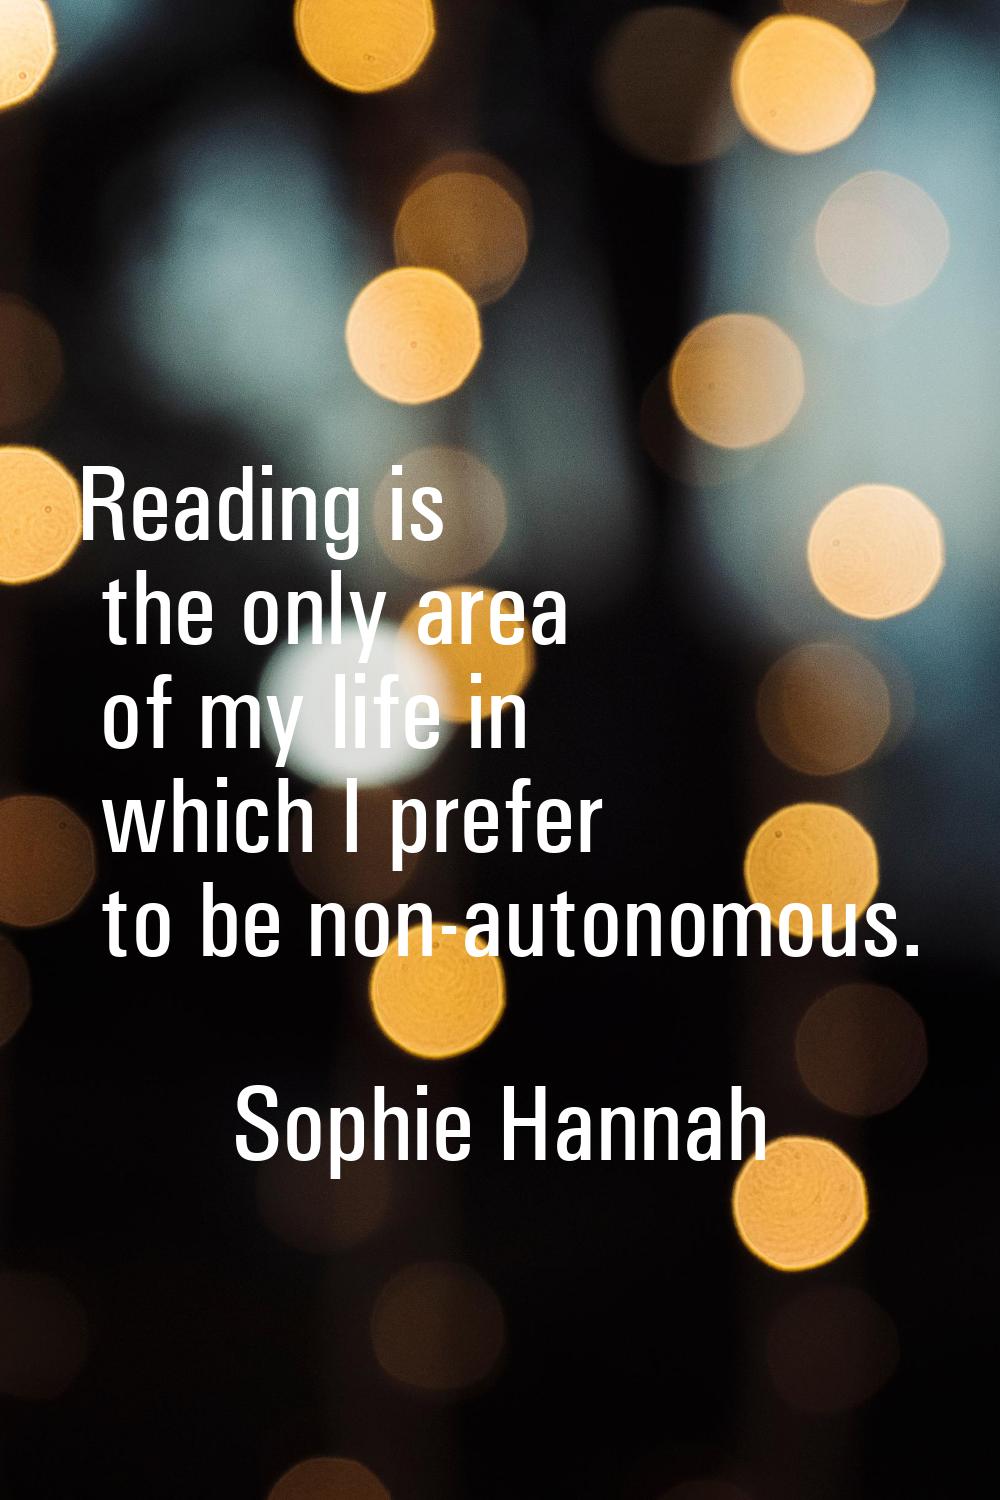 Reading is the only area of my life in which I prefer to be non-autonomous.